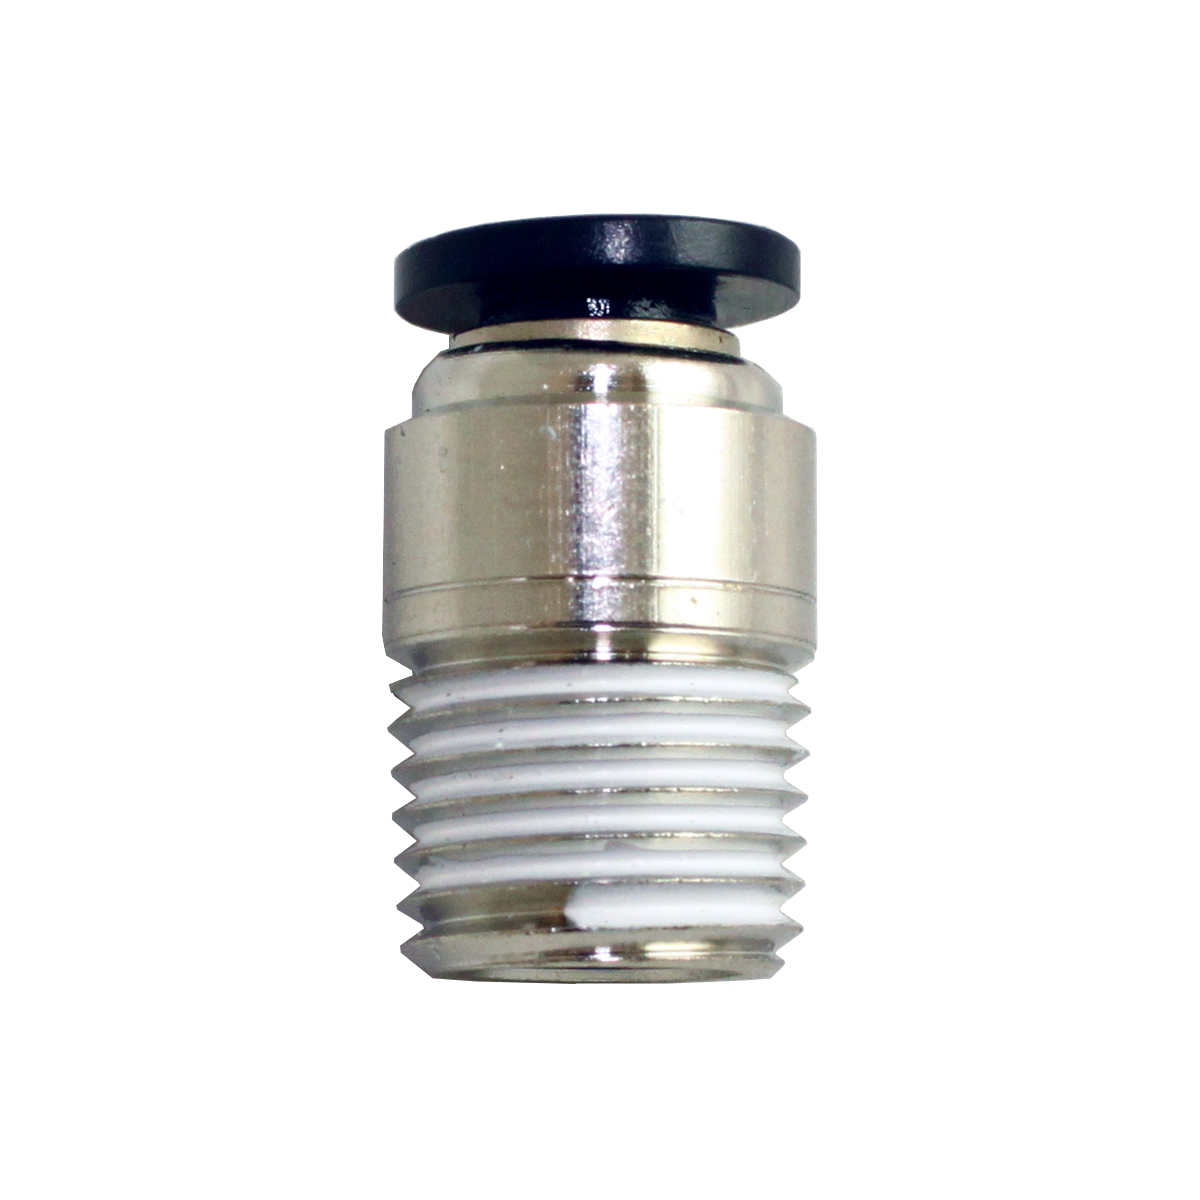 6mm Gerade Push-In-Fitting Pneumatische Push-to-Connect CJ 5x Male 1/4 " 